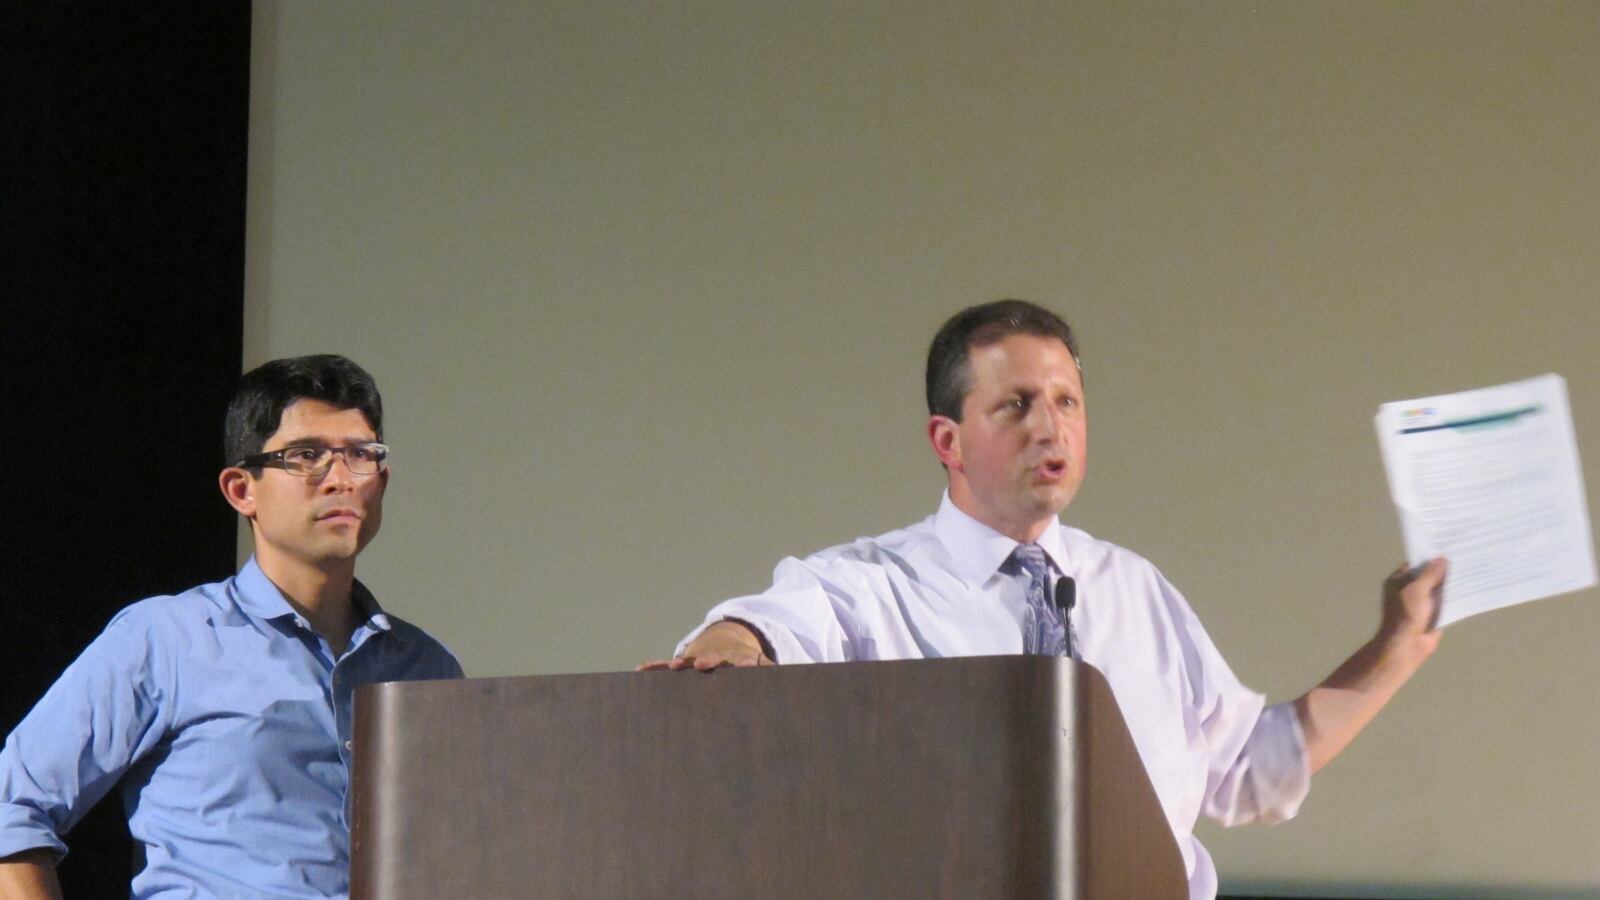 City Council members Carlos Menchaca (left) and Brad Lander hosted a parents forum in 2014 to discuss diversity in schools.